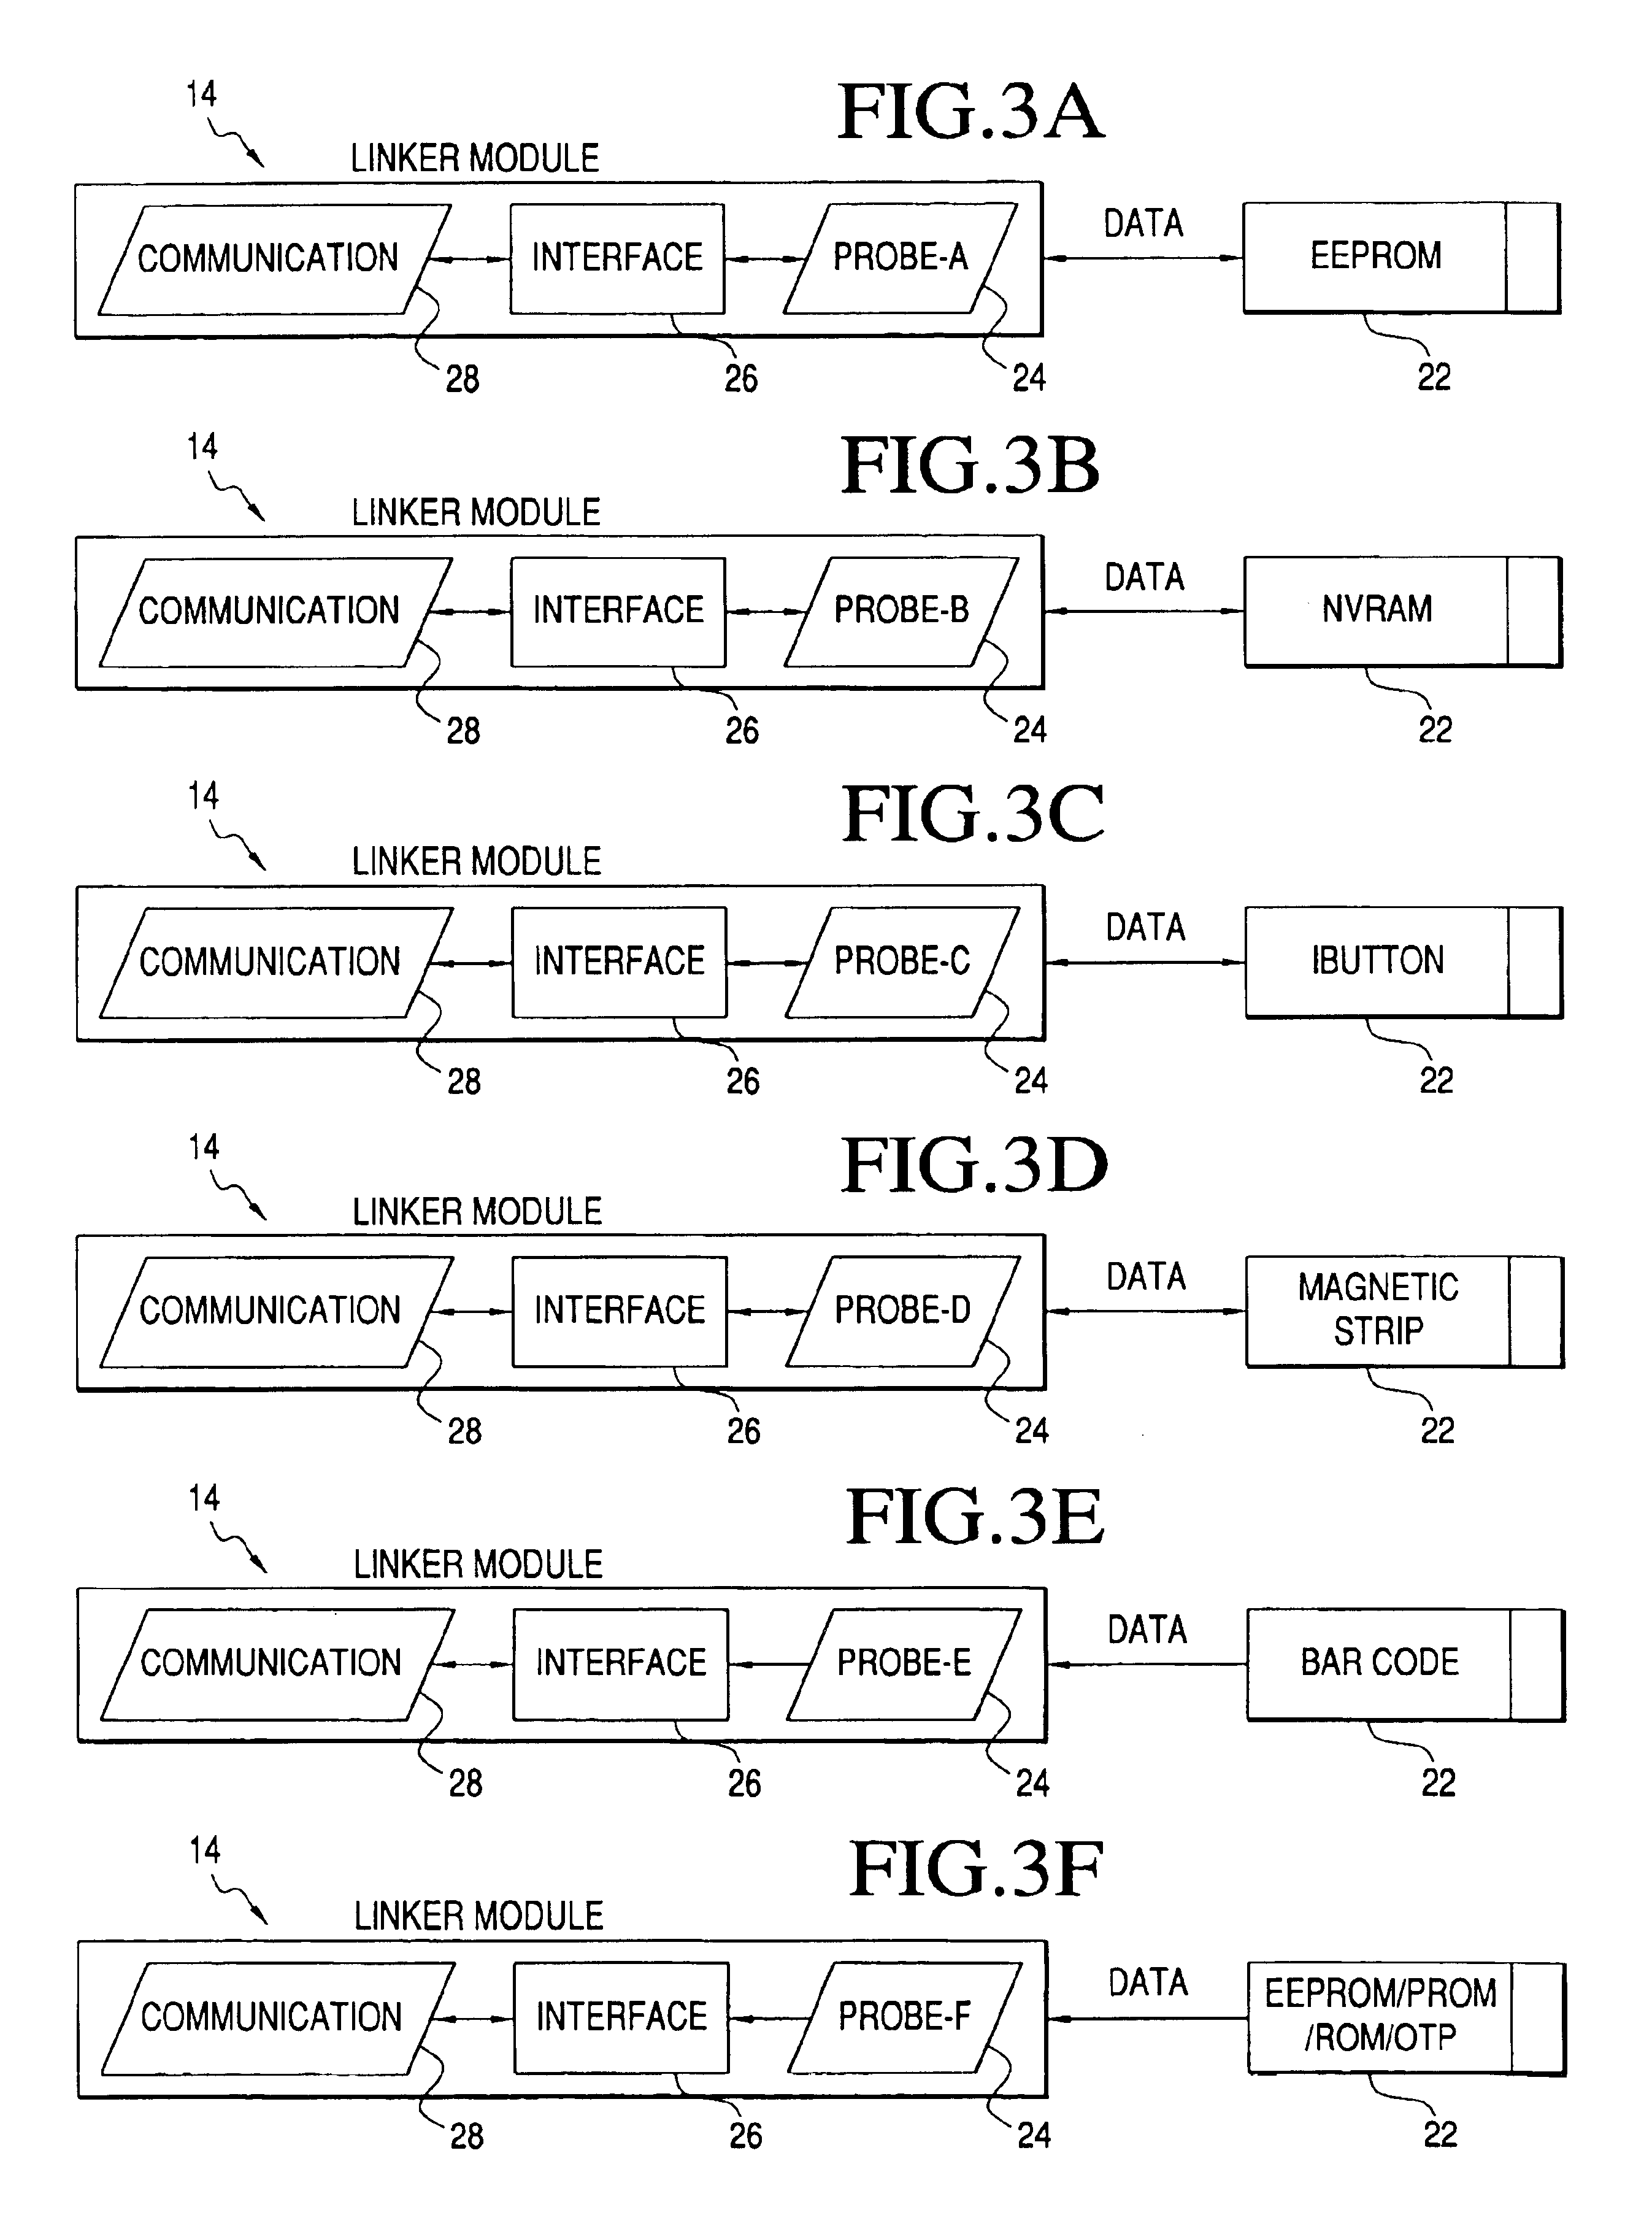 Method and system for ordering services or products, including prescriptions